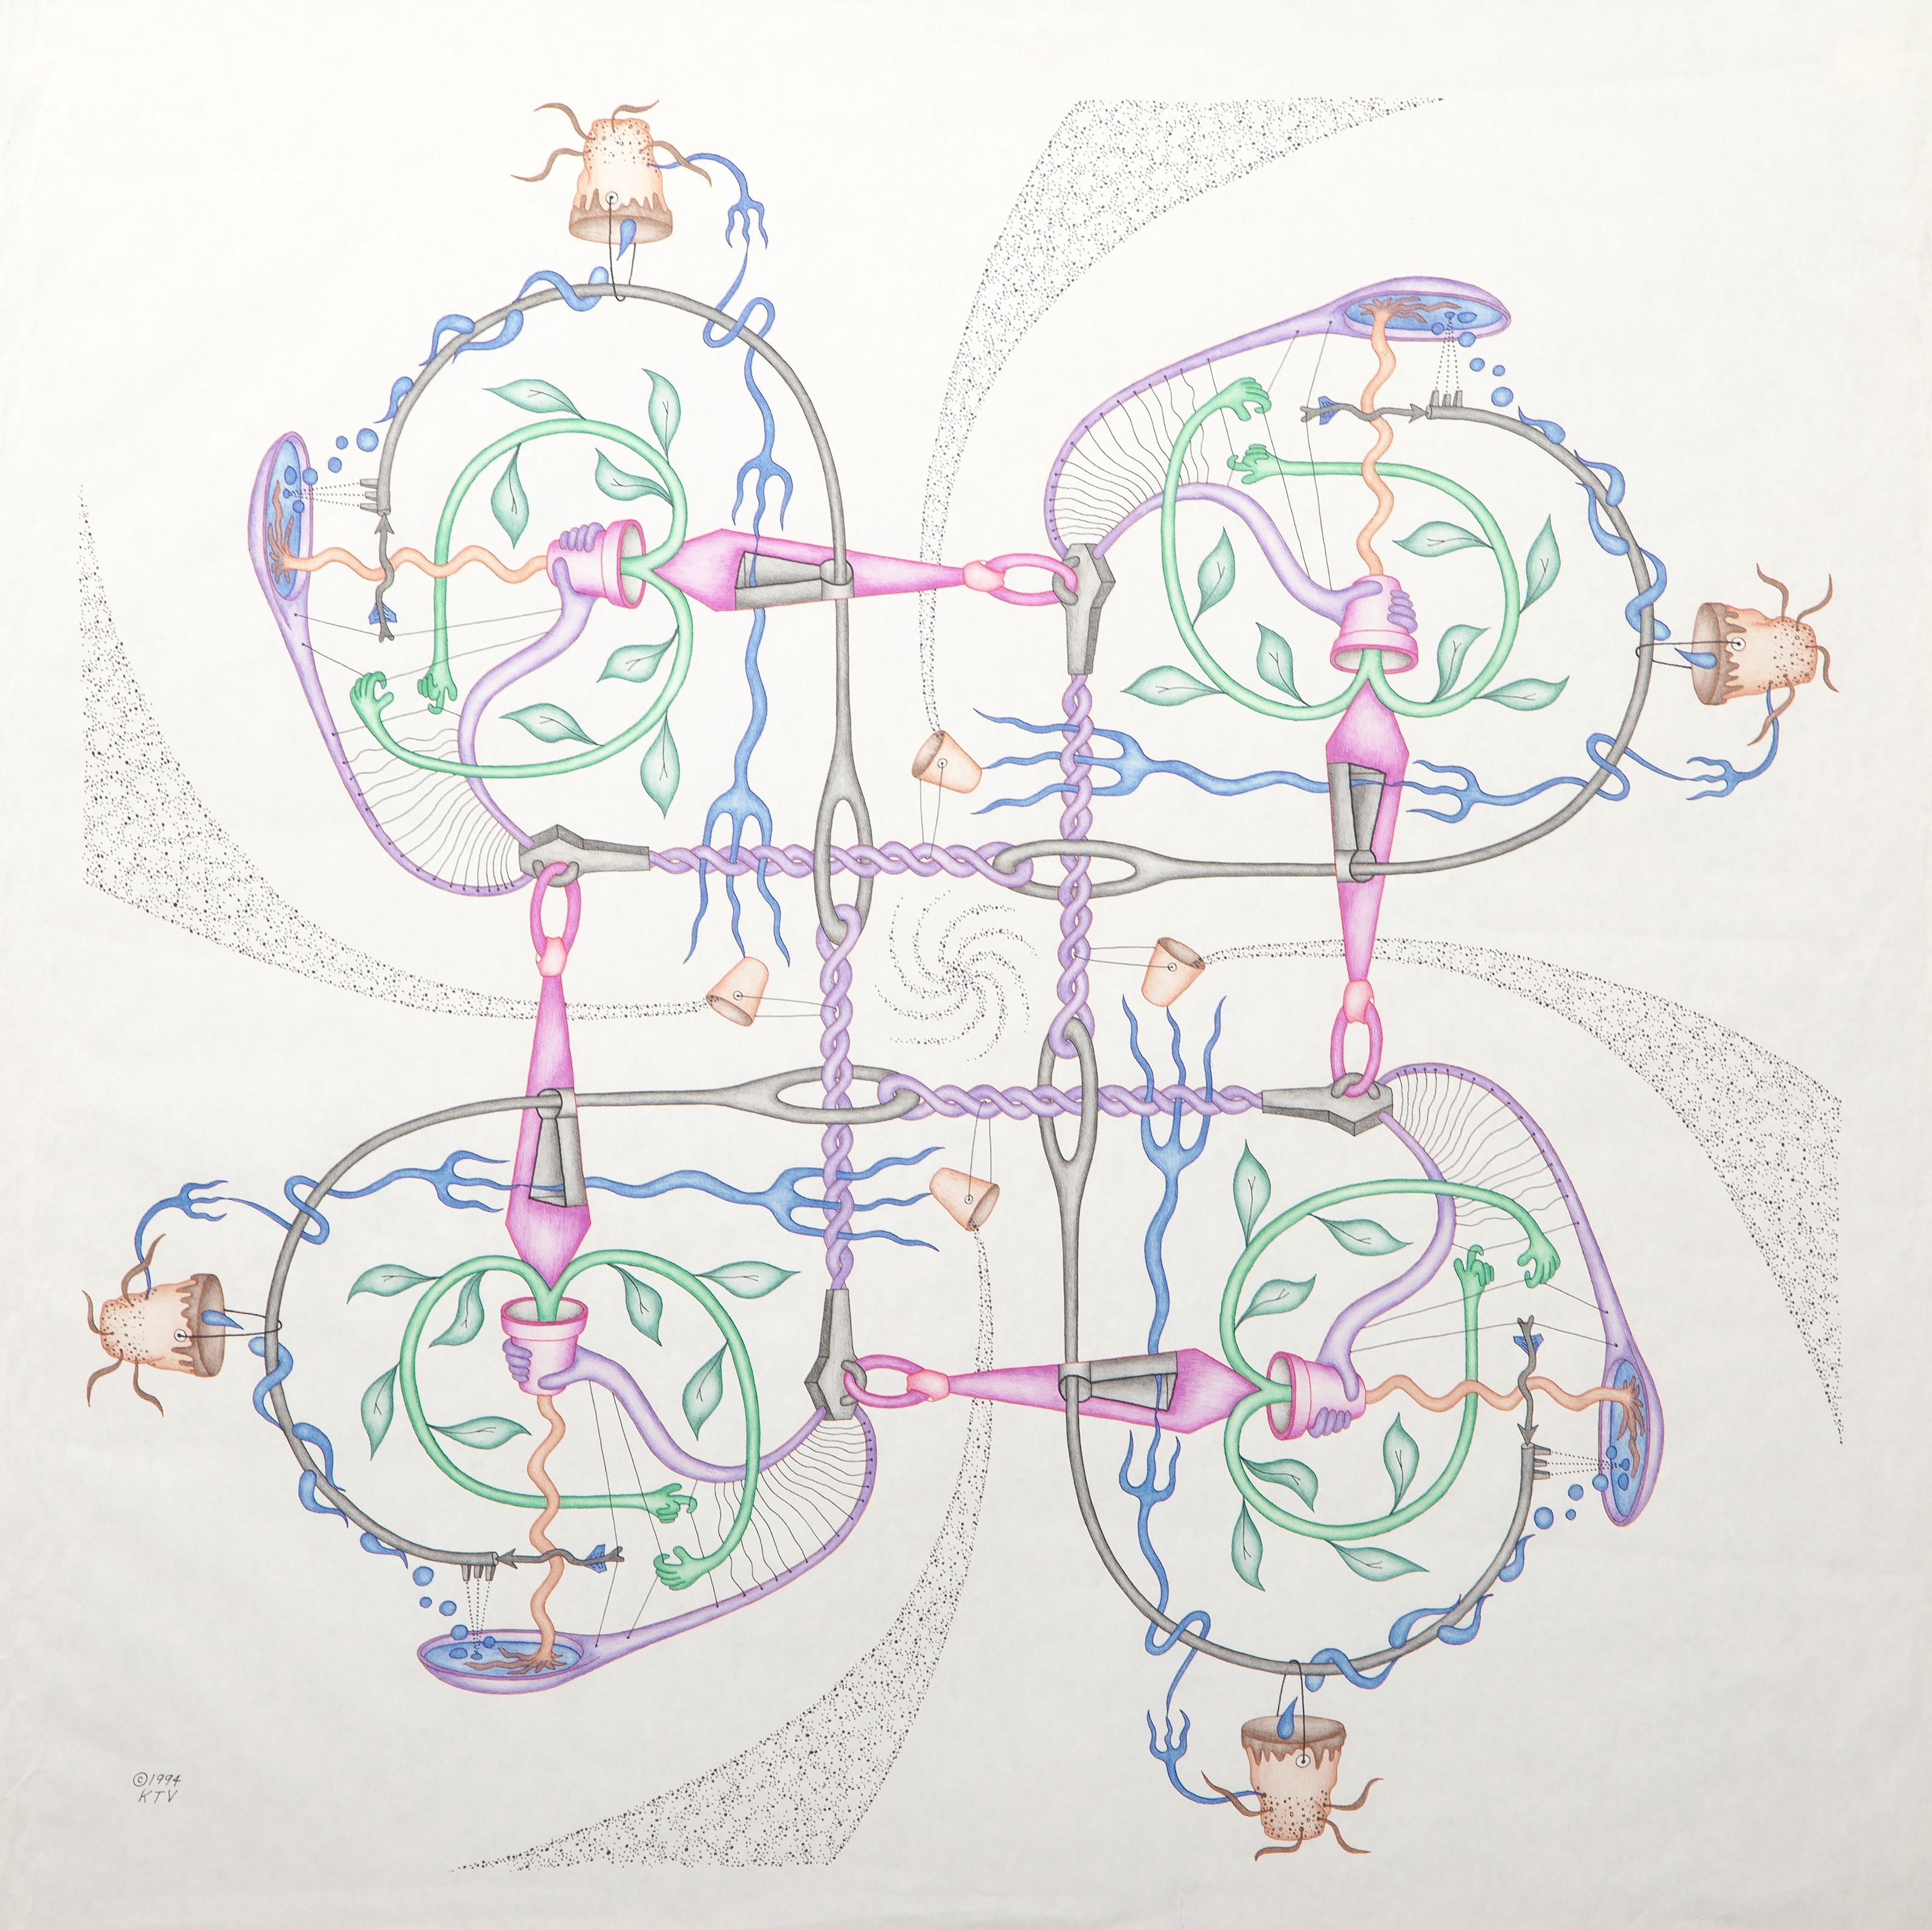 Kevin Varner, American (1954 - 2019) -  Harmonic Convergence. Year: 1994, Medium: Color Pencil and Ink on Paper, signed and dated lower left, Size: 28 x 28 in. (71.12 x 71.12 cm) 